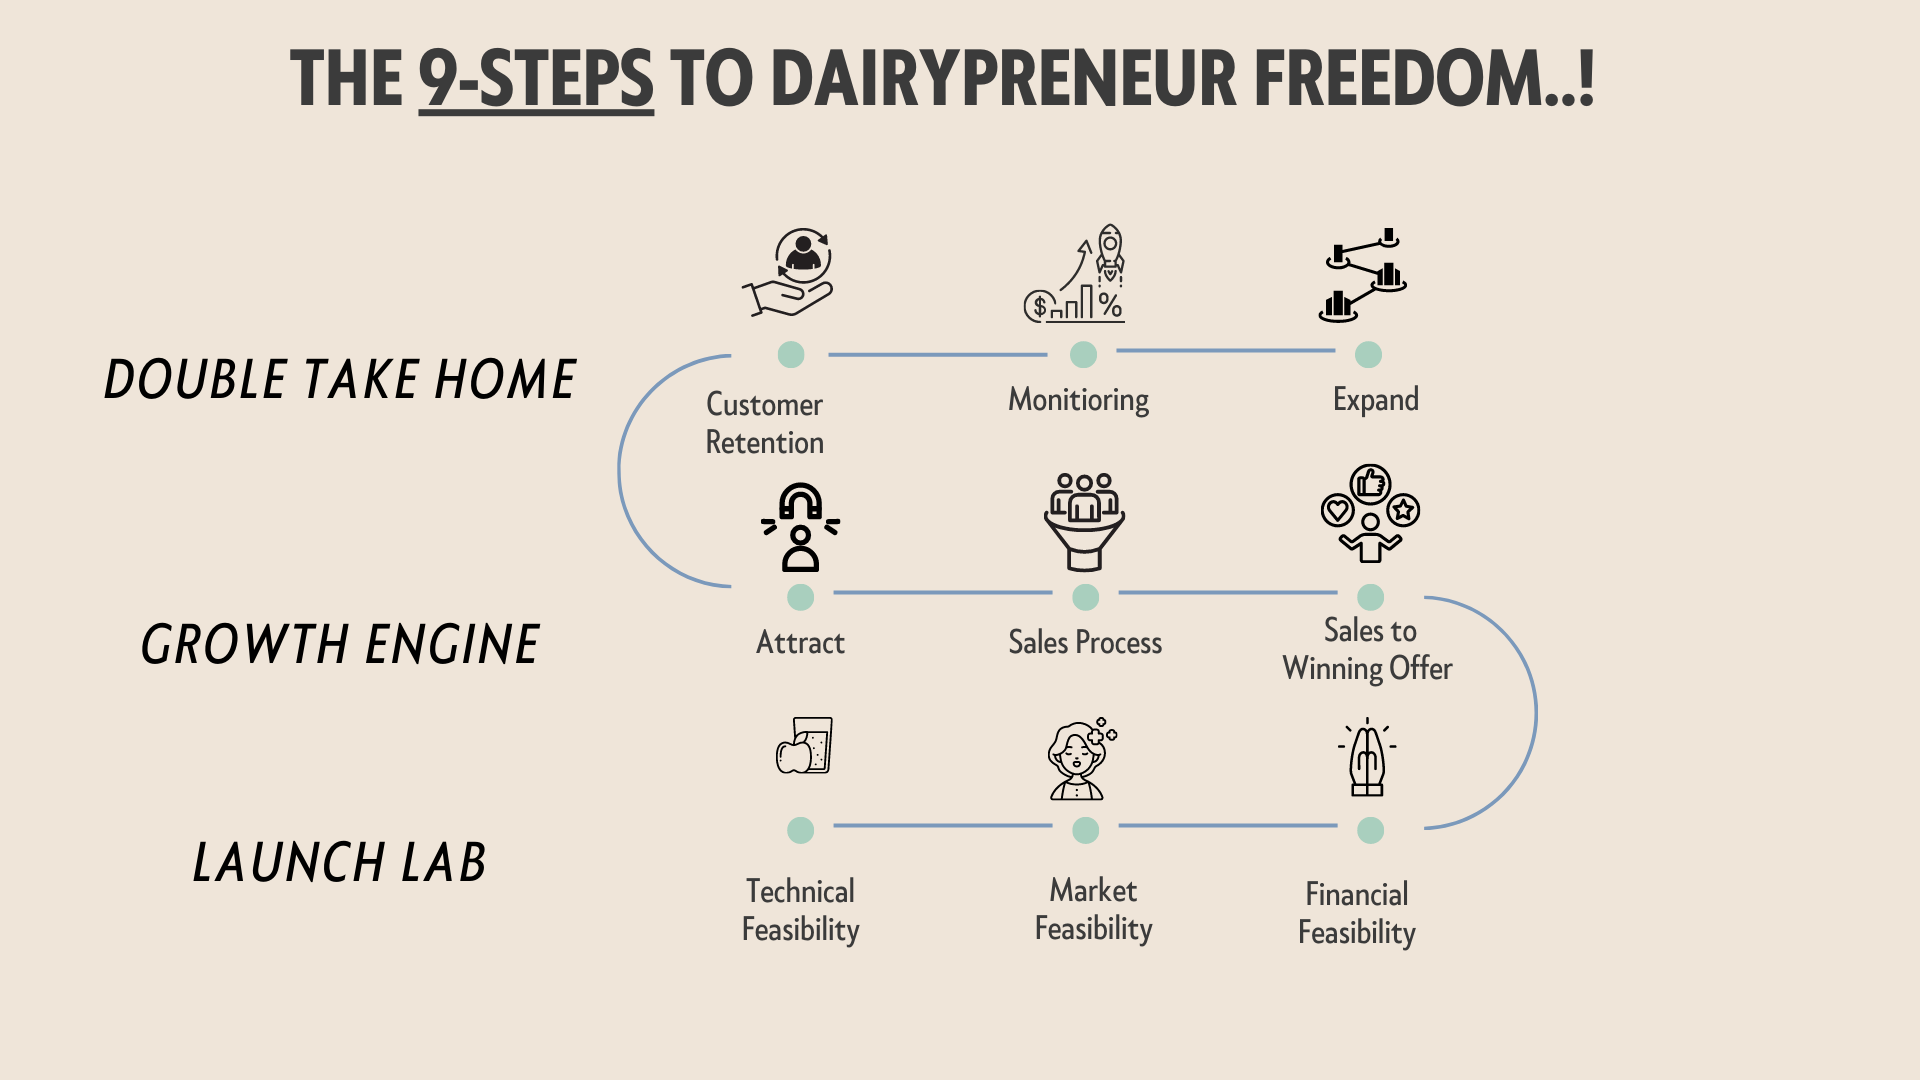 9-step-dairypreneur-freedom-amol-ghodke-dairy-consultant.png